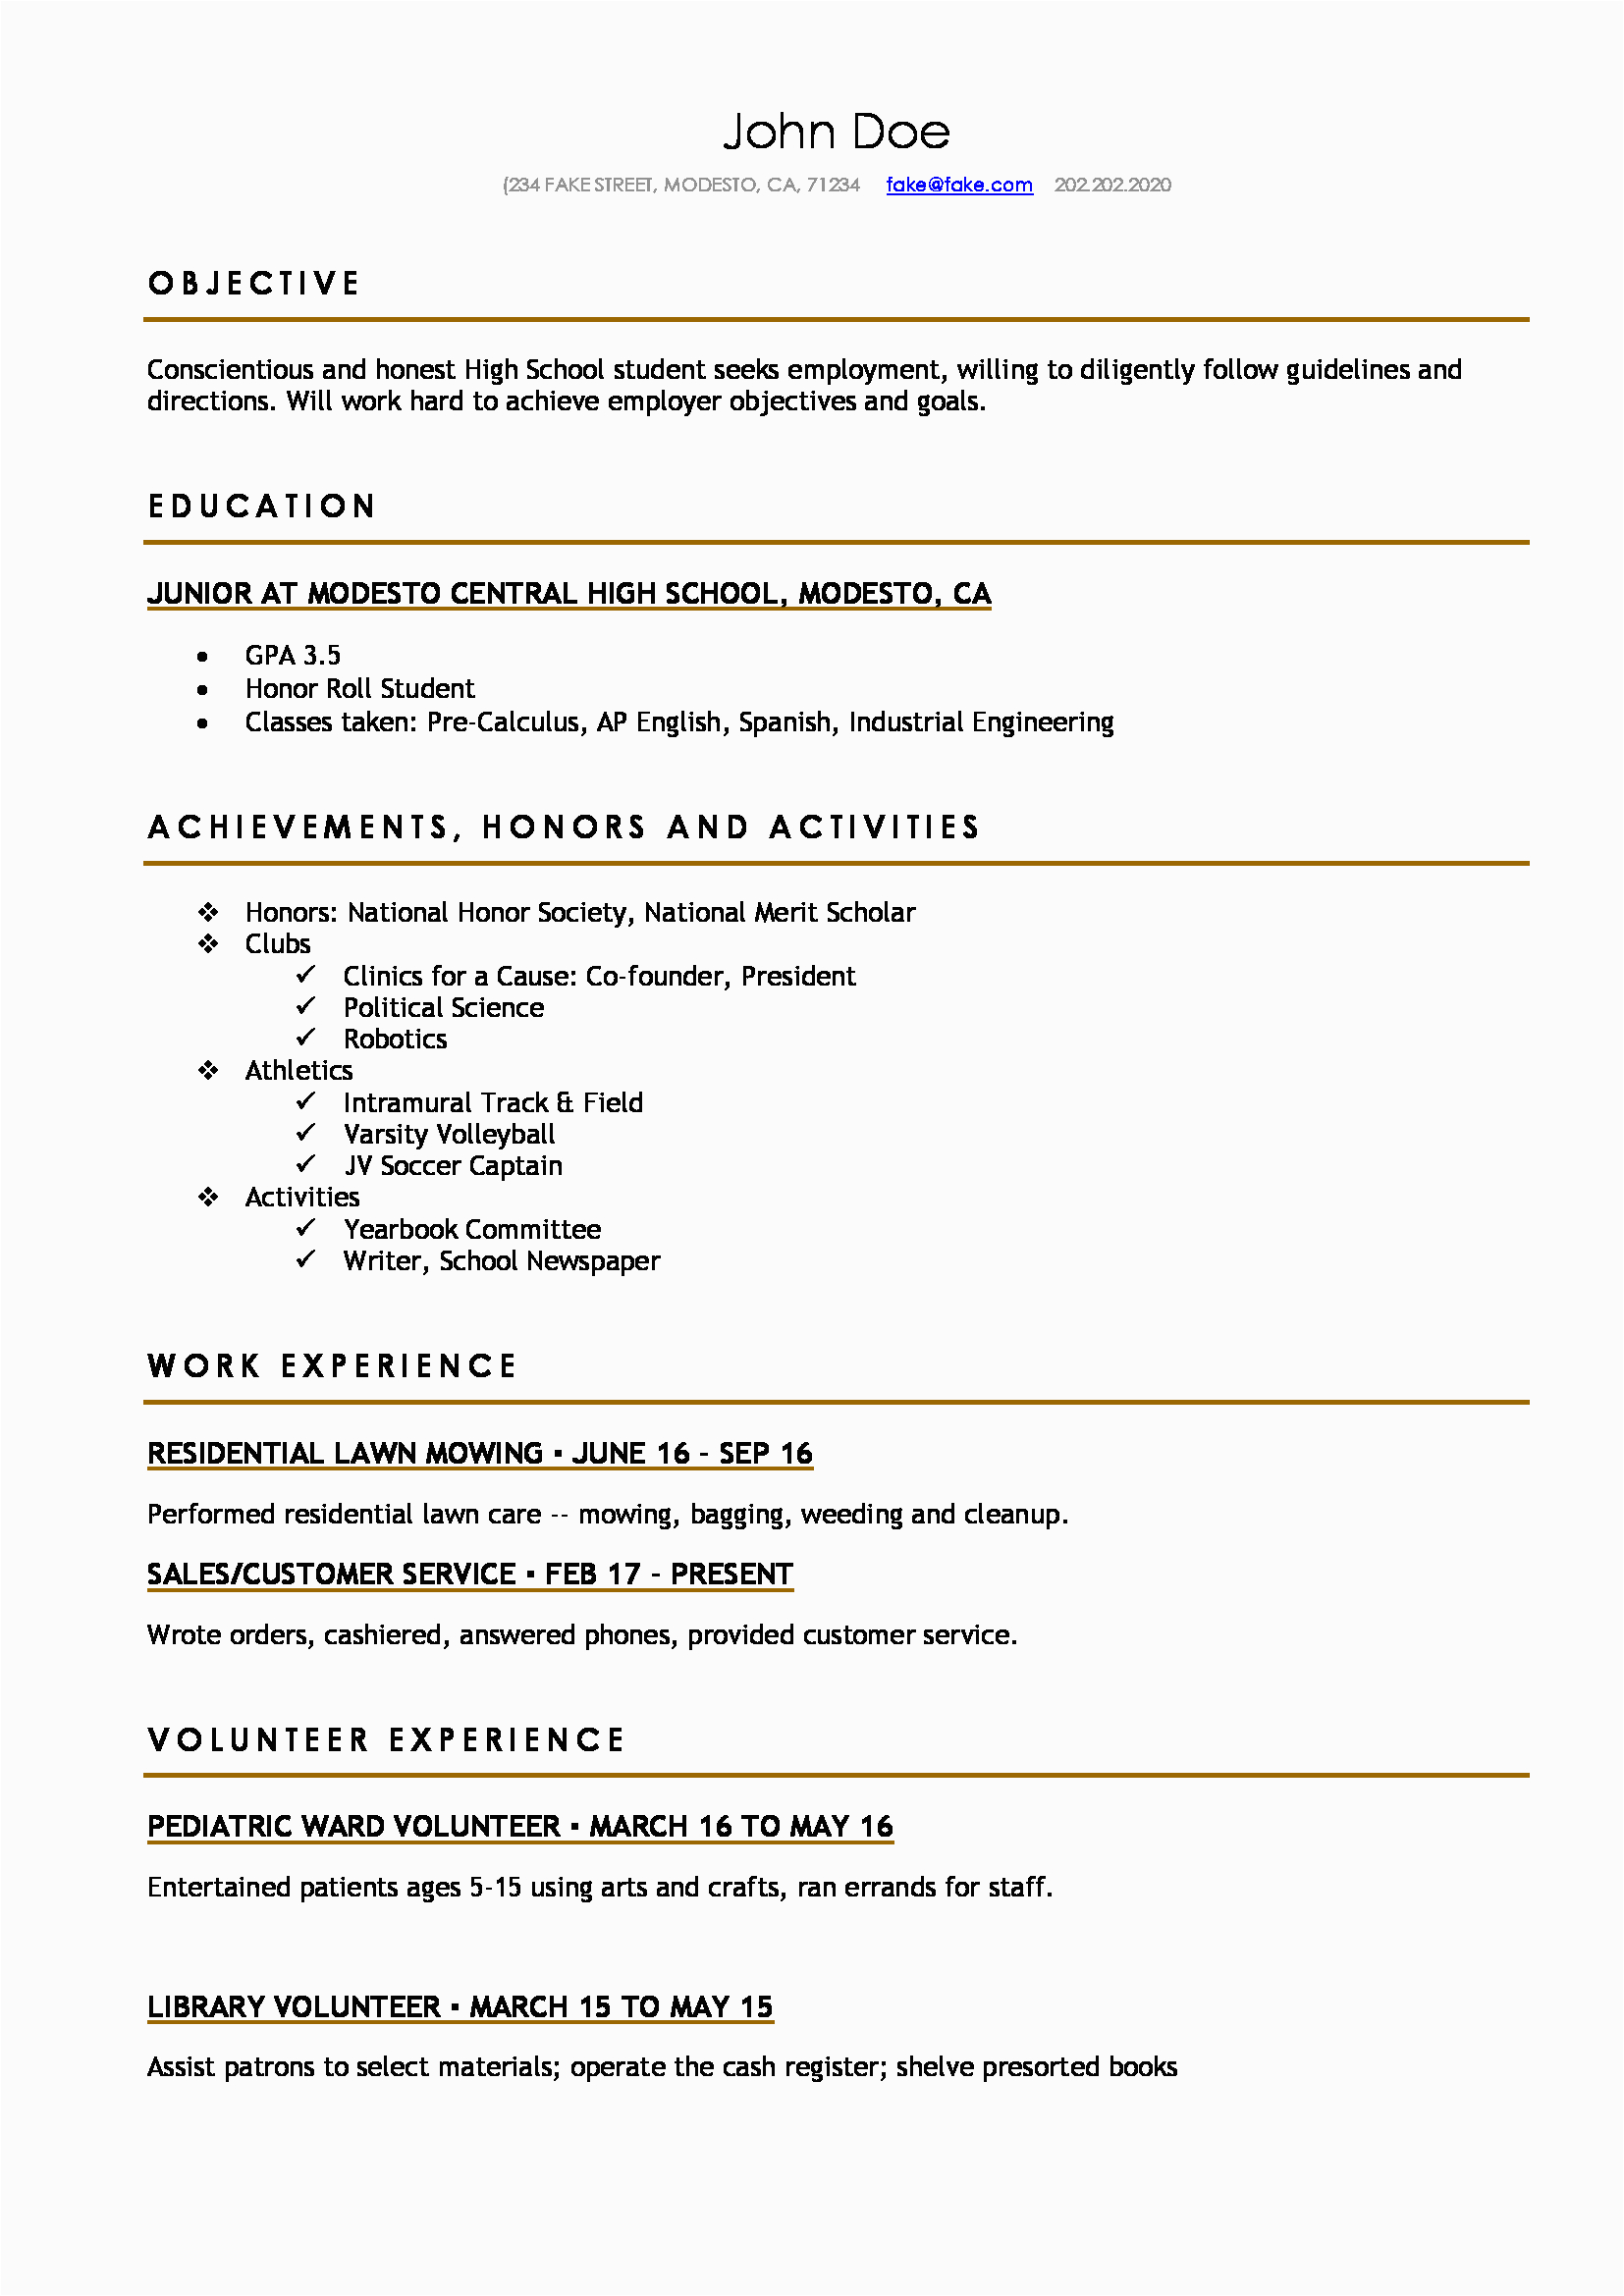 Samples Of A High School Student Resume High School Resume Resume Templates for High School Students and Teens